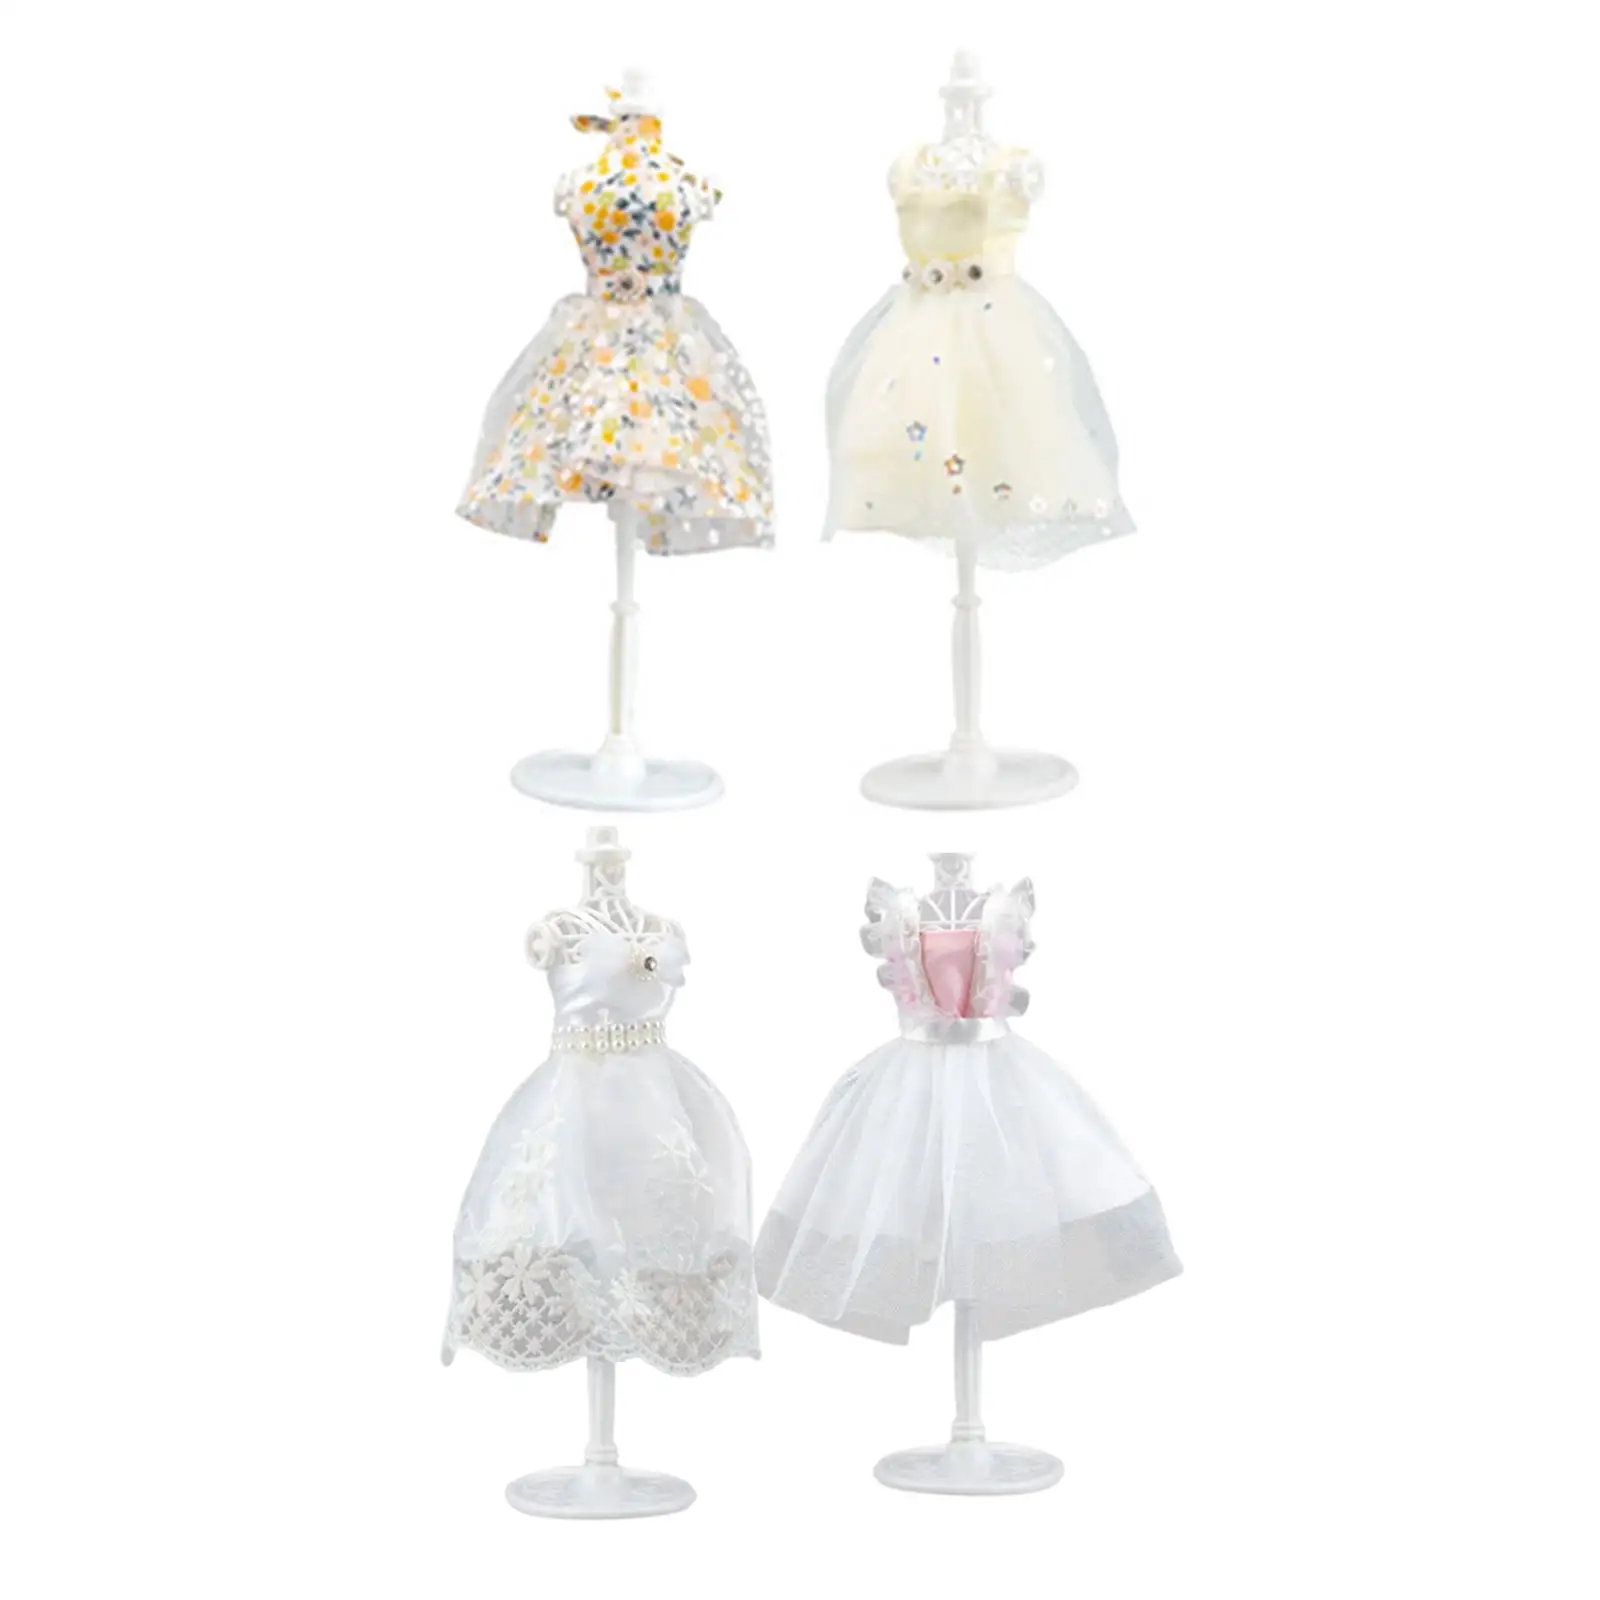 Doll Clothing design Learning Toys Princess Doll Clothes Making Princess Dress Clothes Set Fashion Design Kit for Party